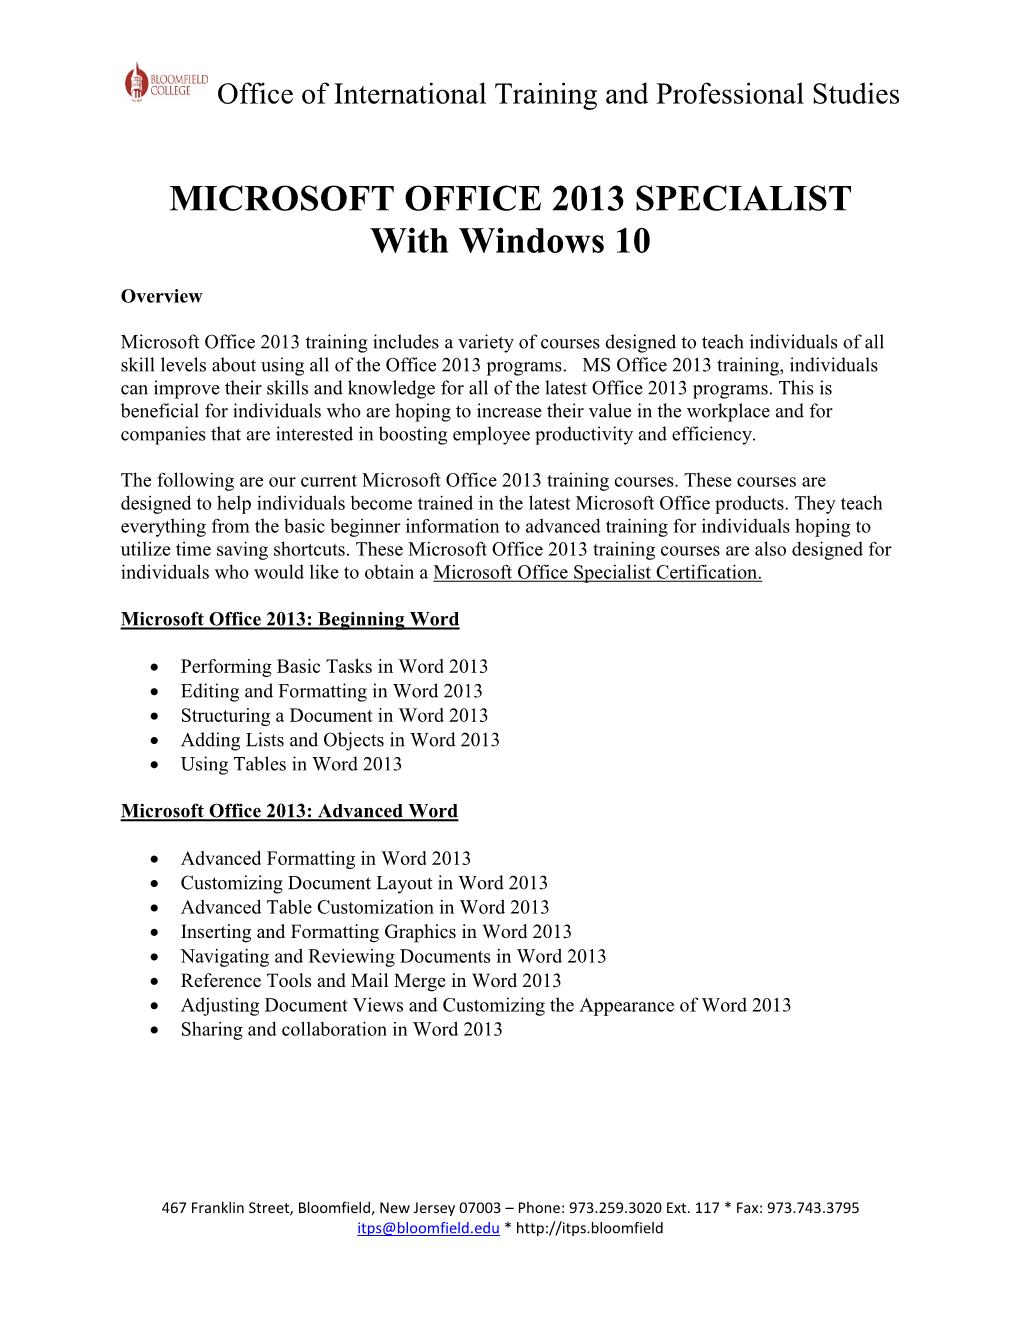 MICROSOFT OFFICE 2013 SPECIALIST with Windows 10